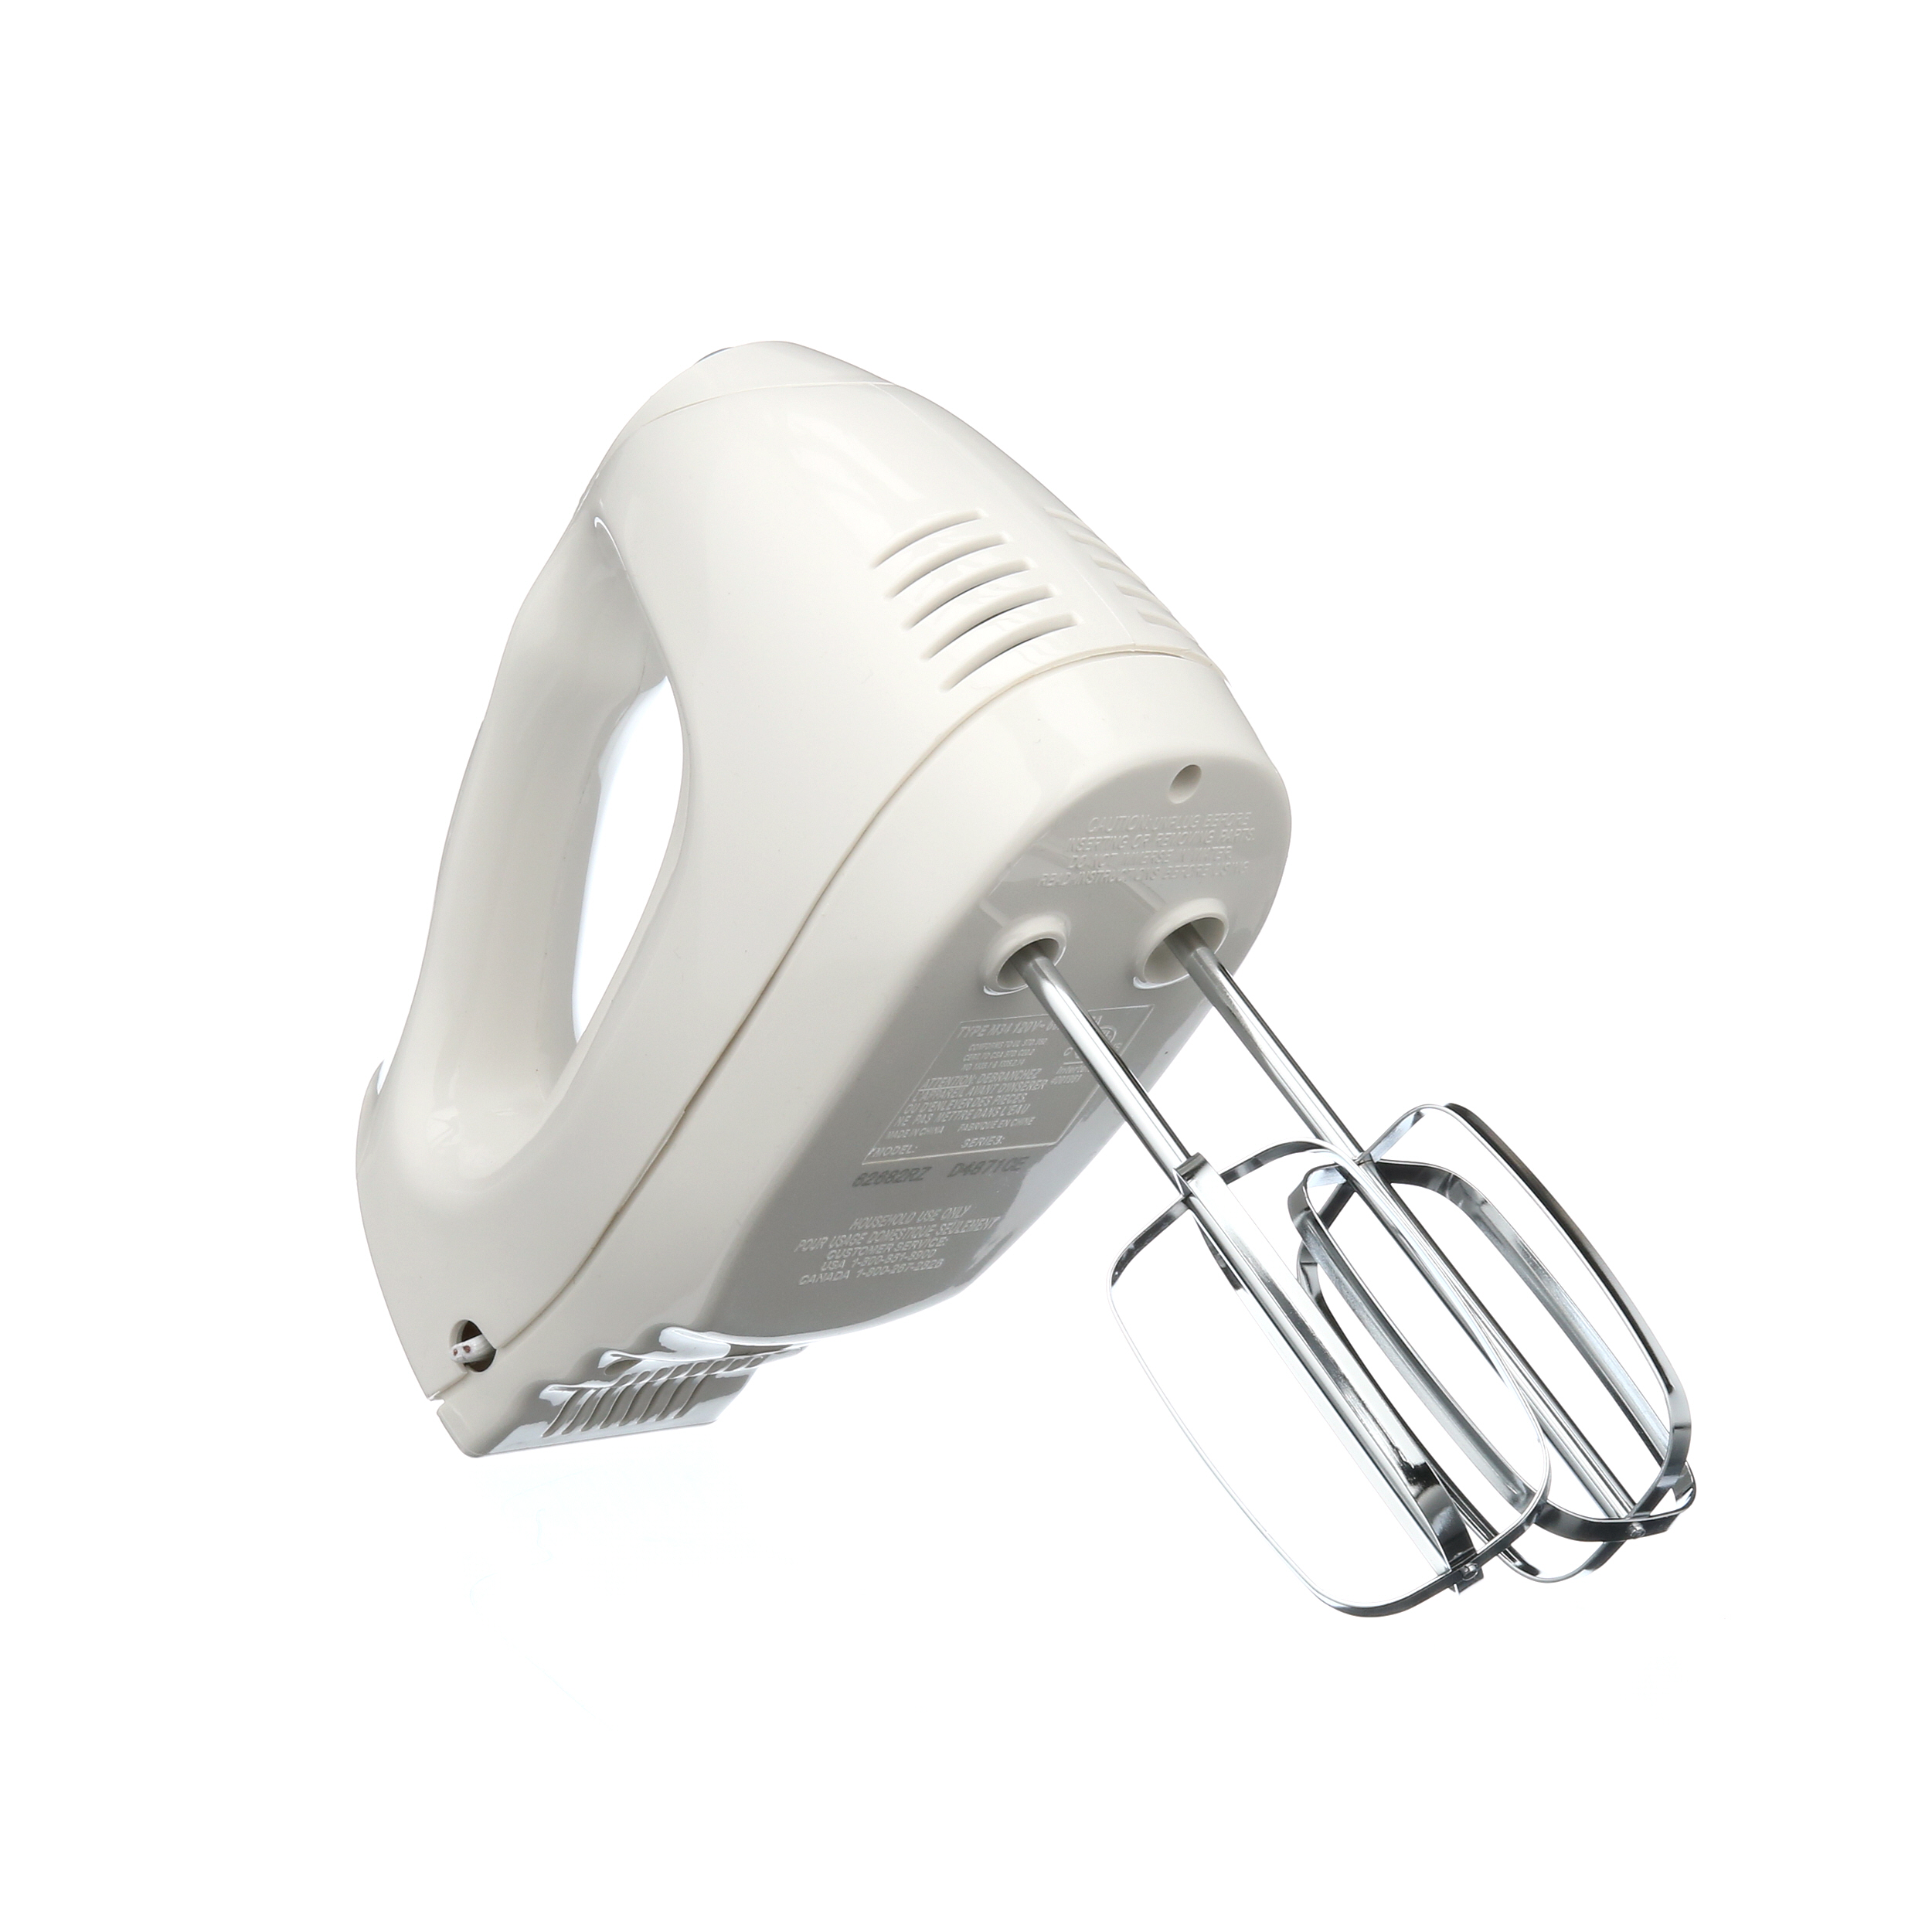 1pc Electric Hand Mixer With Whisk Traditional Beaters Snap - Temu  Philippines